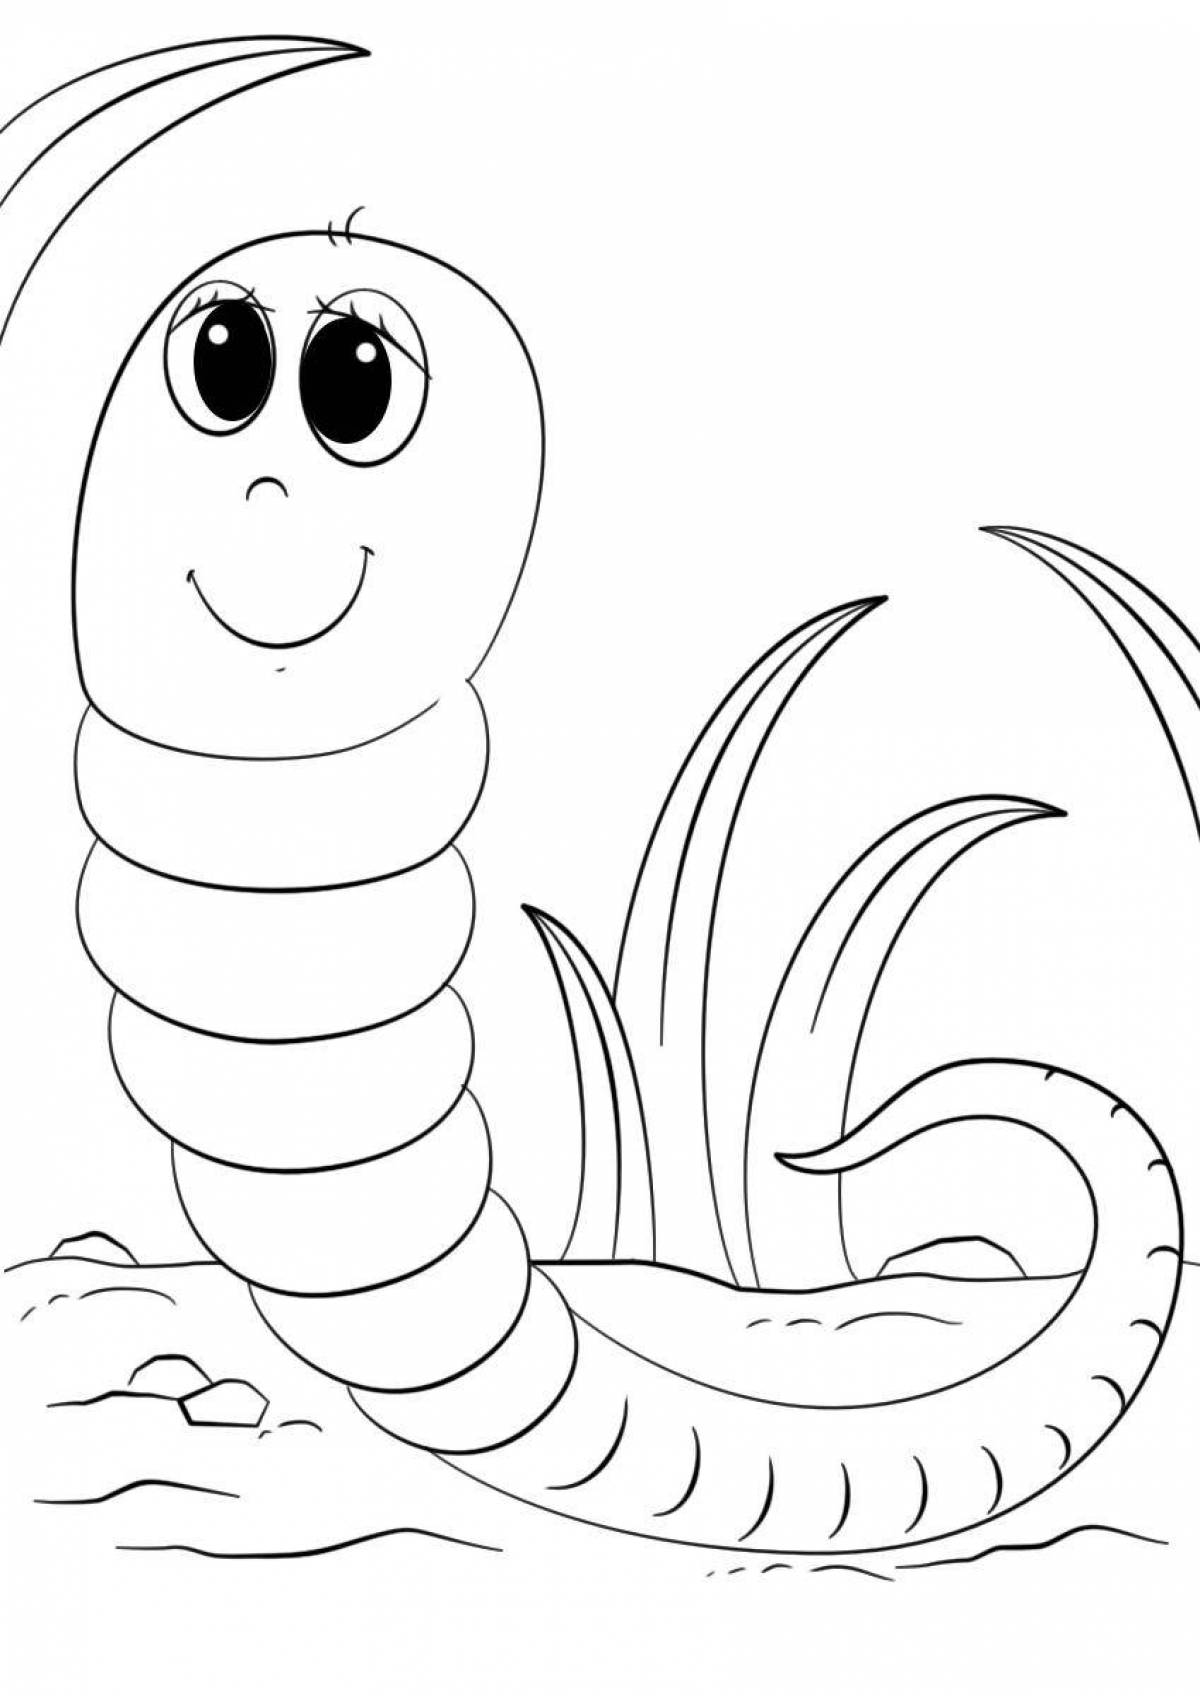 Playful worm coloring page for kids